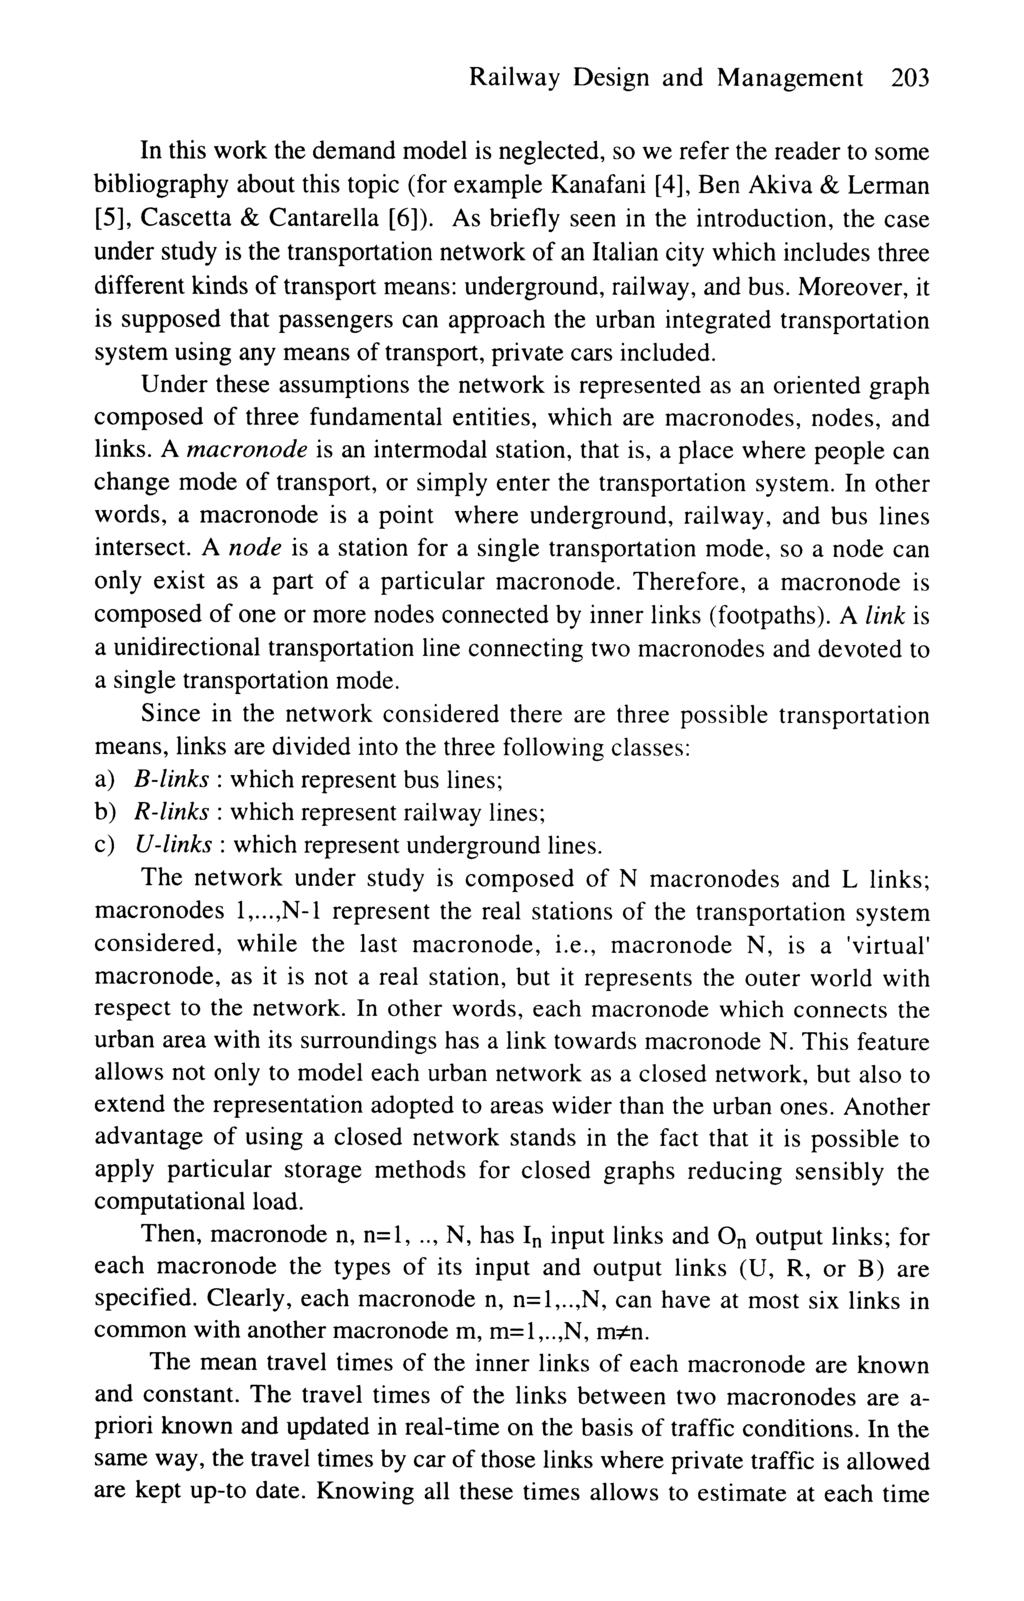 Railway Design and Management 203 In this work the demand model is neglected, so we refer the reader to some bibliography about this topic (for example Kanafani [4], Ben Akiva & Lerman [5], Cascetta